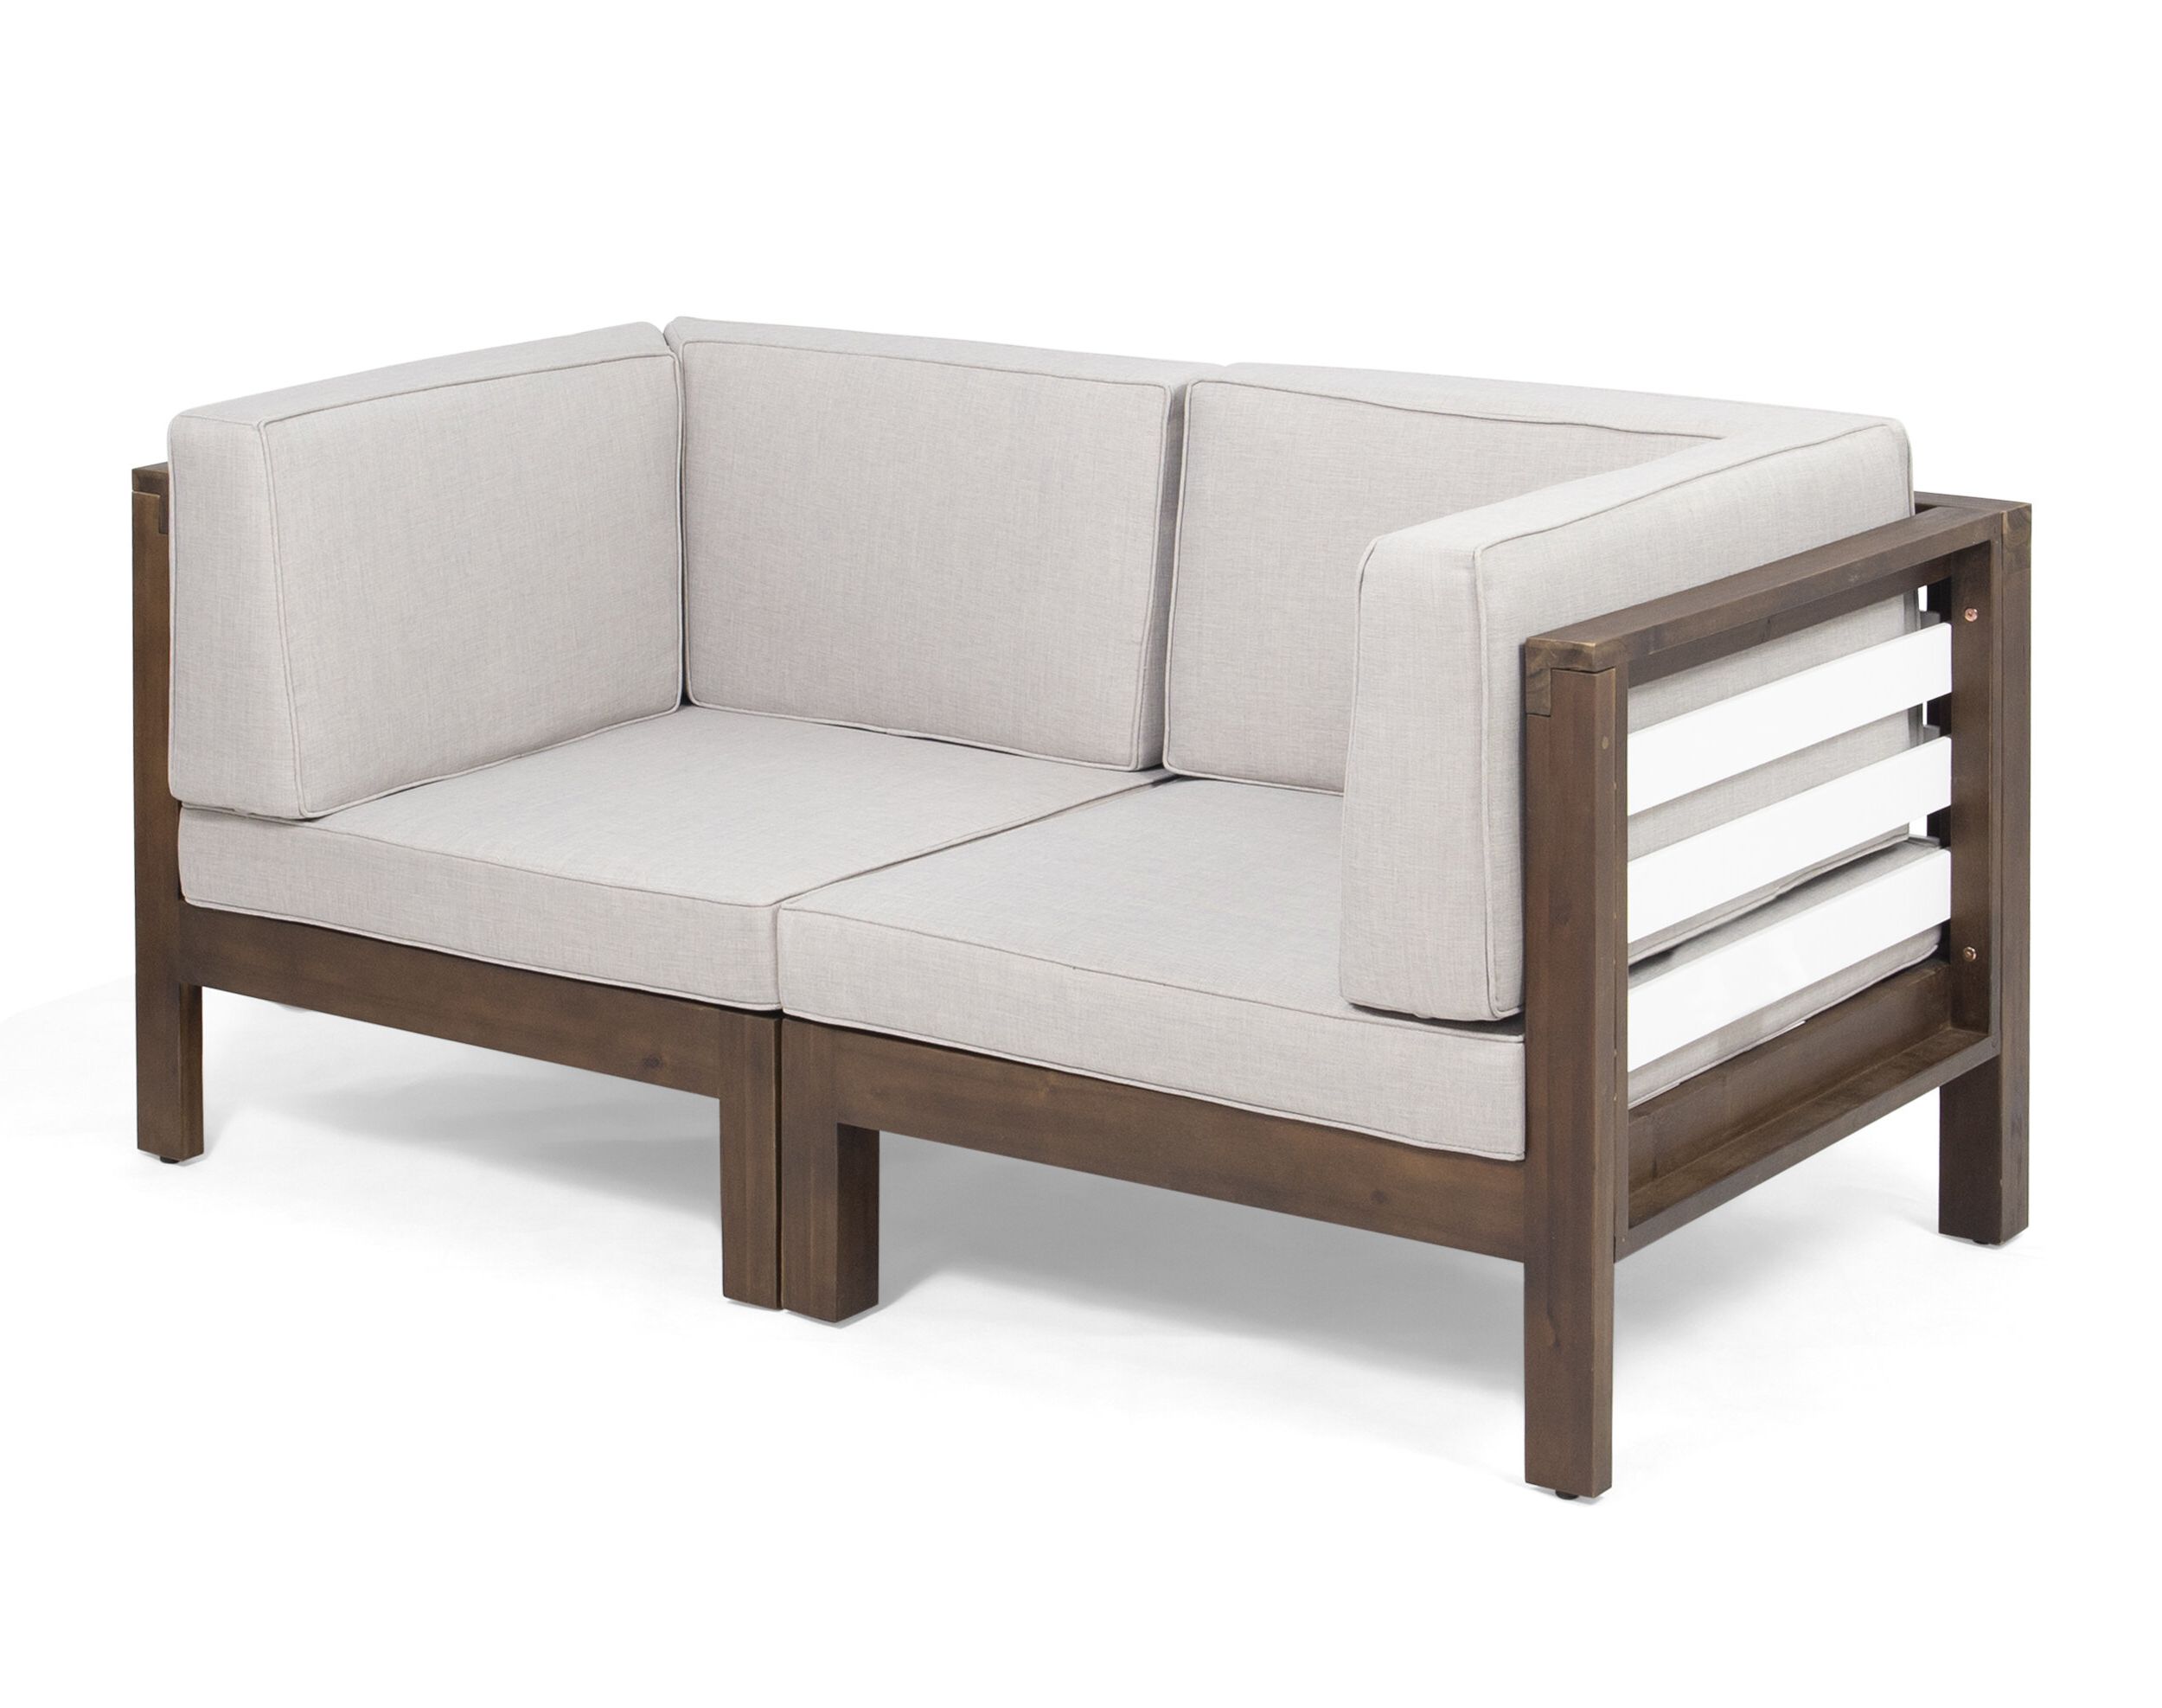 Widely Used Solem Outdoor Modular Loveseat With Cushions Pertaining To Provencher Patio Loveseats With Cushions (View 16 of 20)